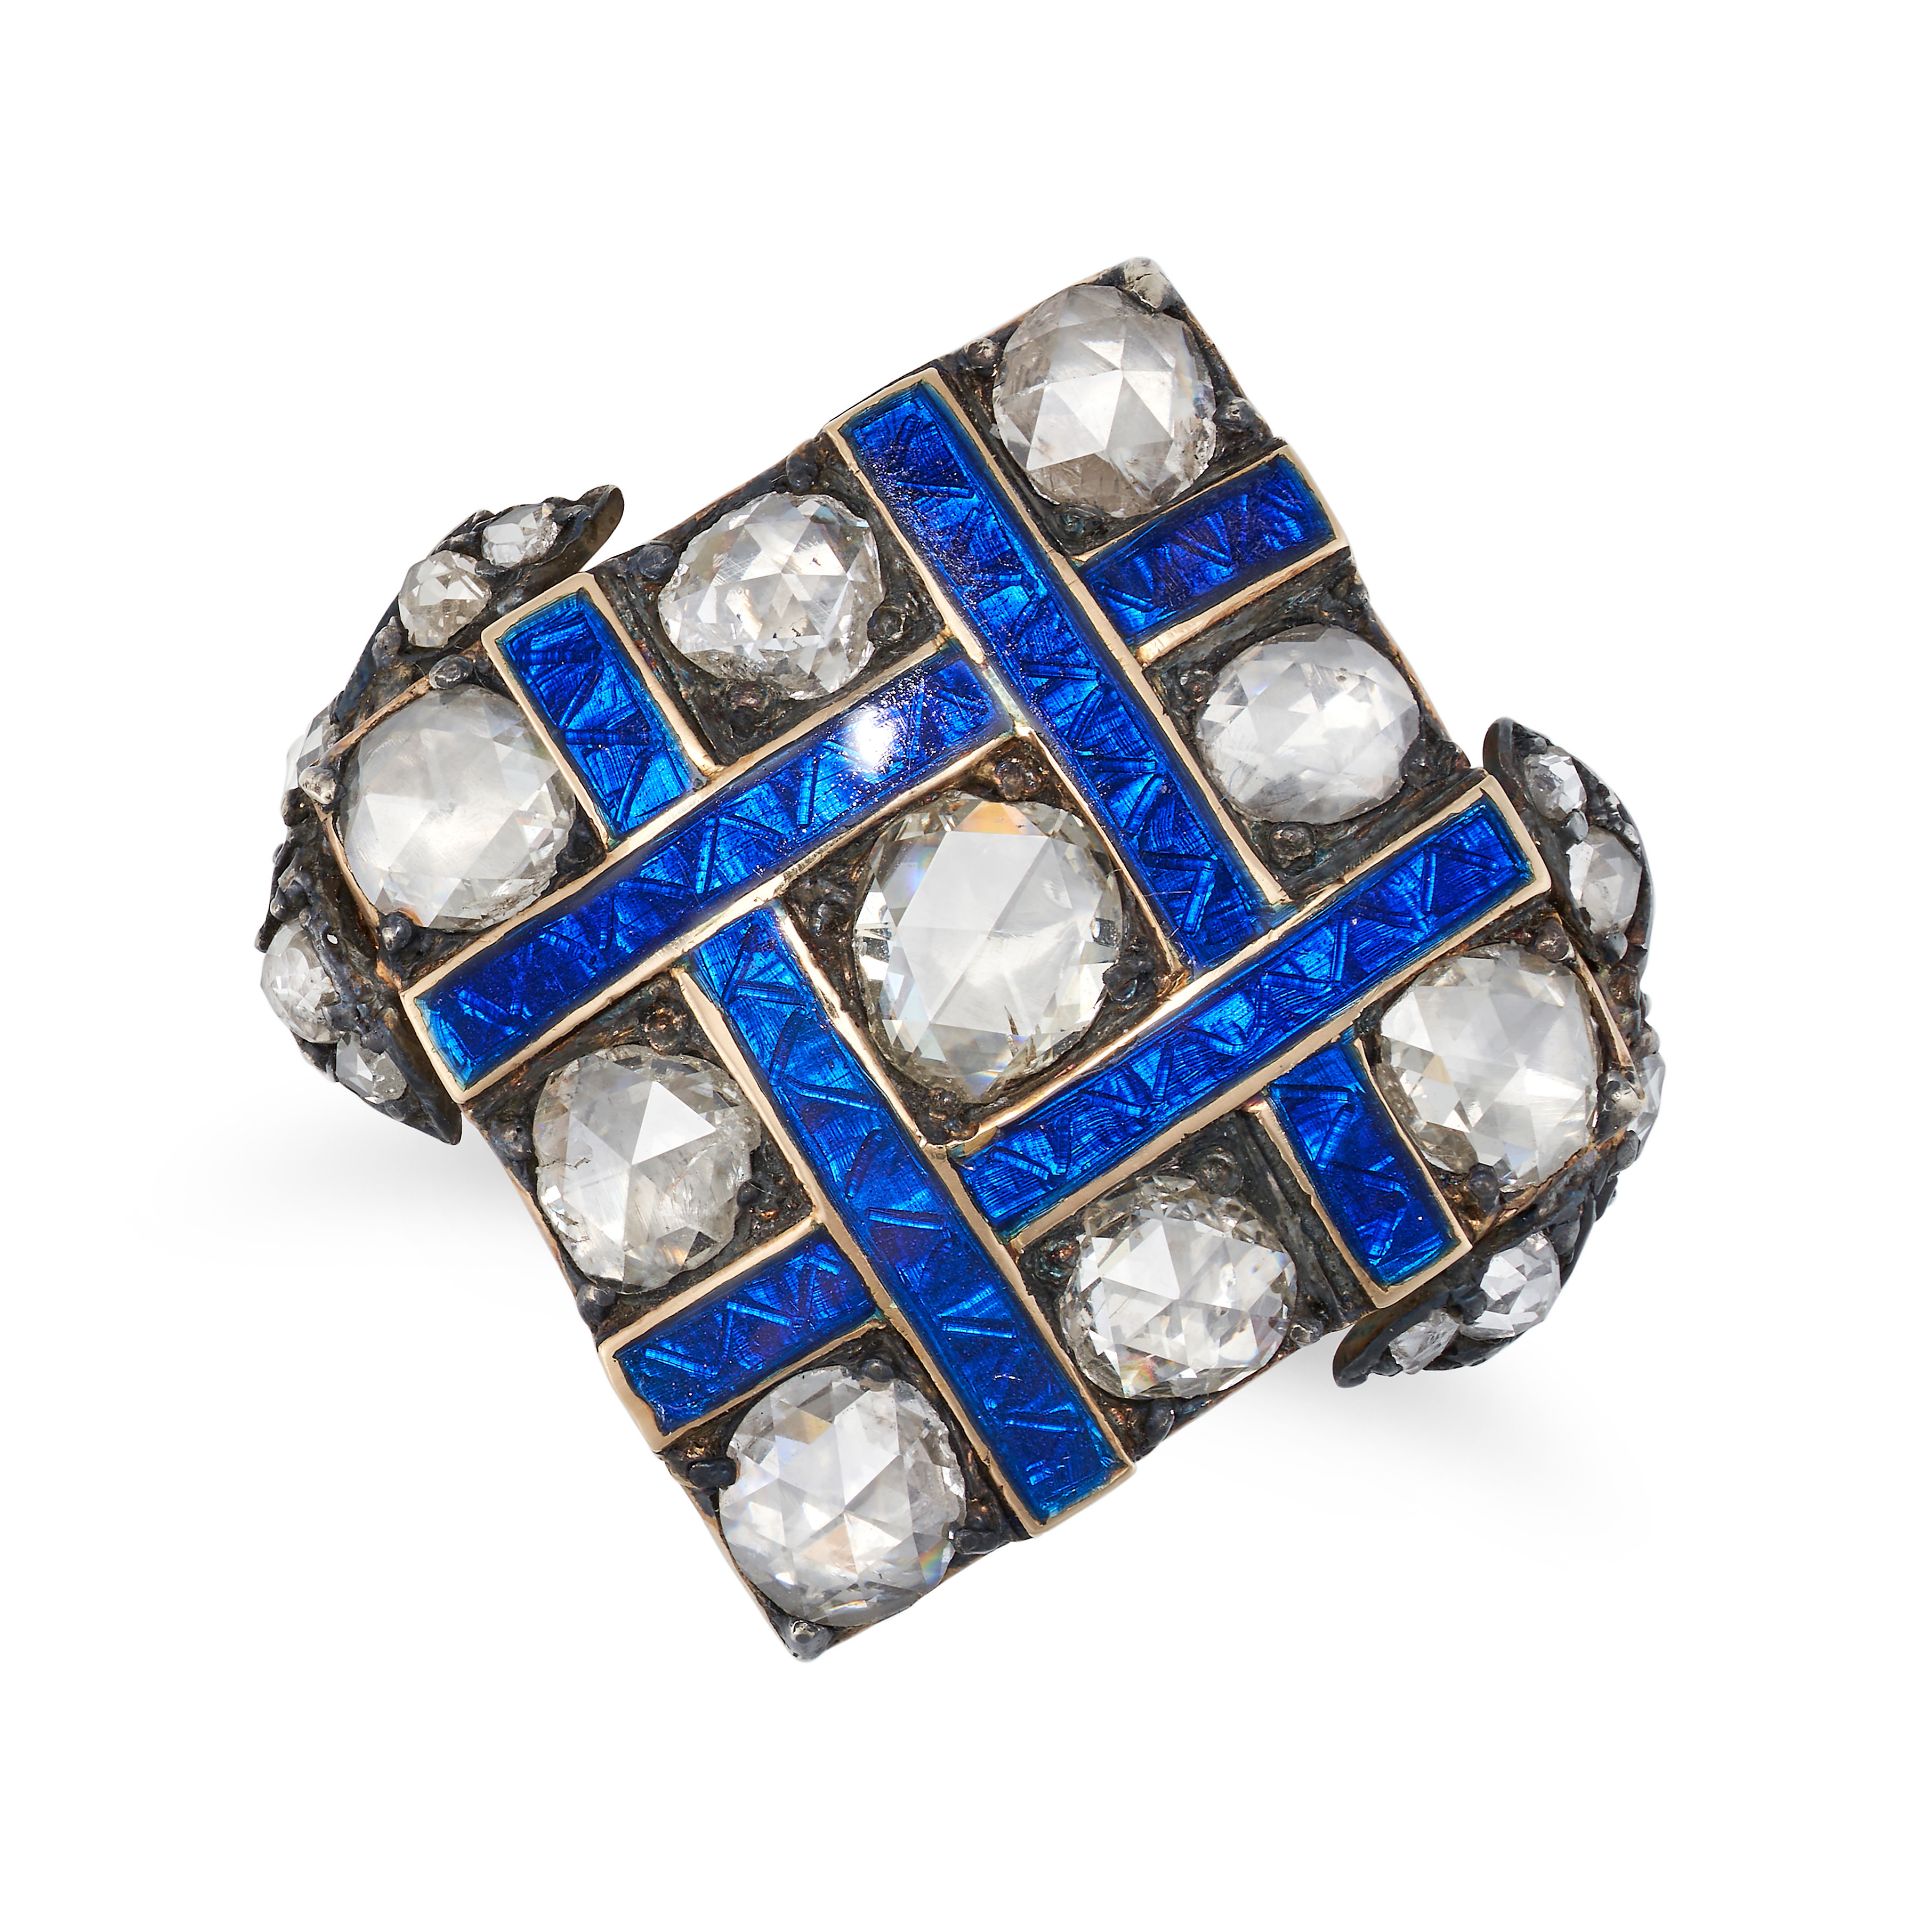 AN ANTIQUE DIAMOND AND ENAMEL RING in yellow gold and silver, the diamond shaped face set with ro...